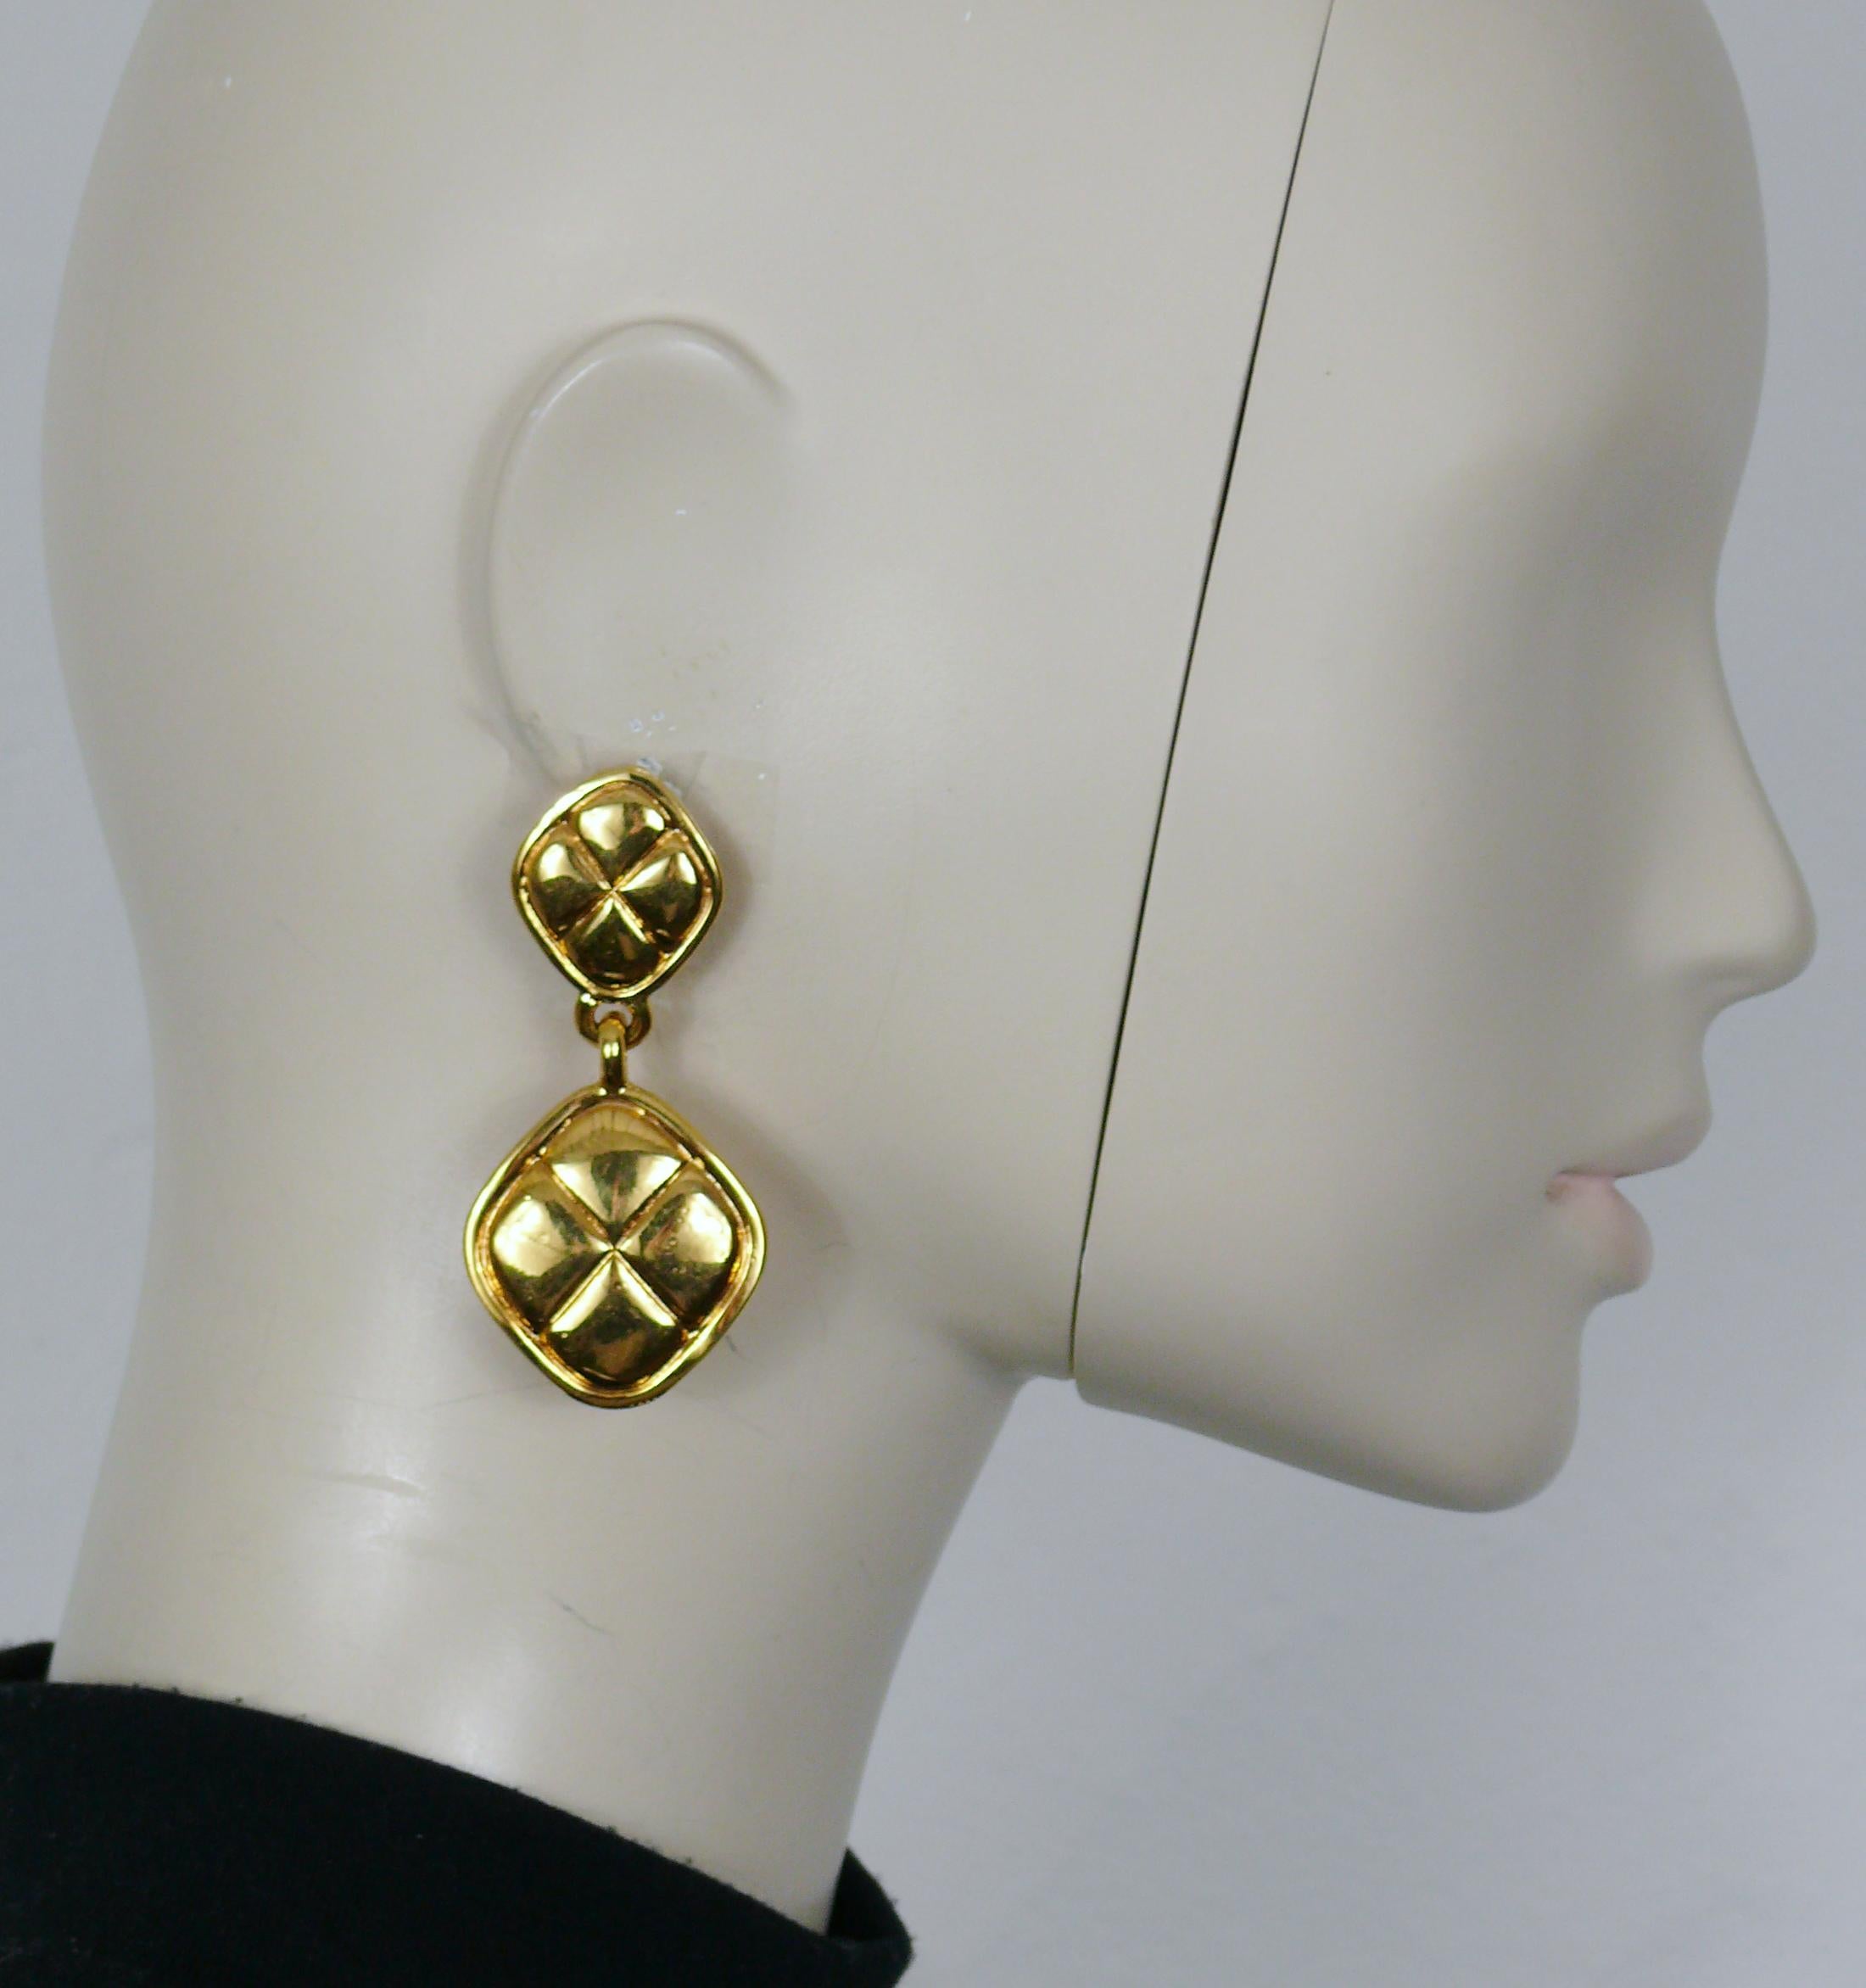 CHANEL vintage gold tone quilted dangling earrings.

Embossed CHANEL Made in France.

Indicative measurements : height approx. 6.9 cm (2.72 inches) / max width approx. 3.3 cm (1.30 inches).

Weight per earring : approx. 12 grams.

Material : Gold